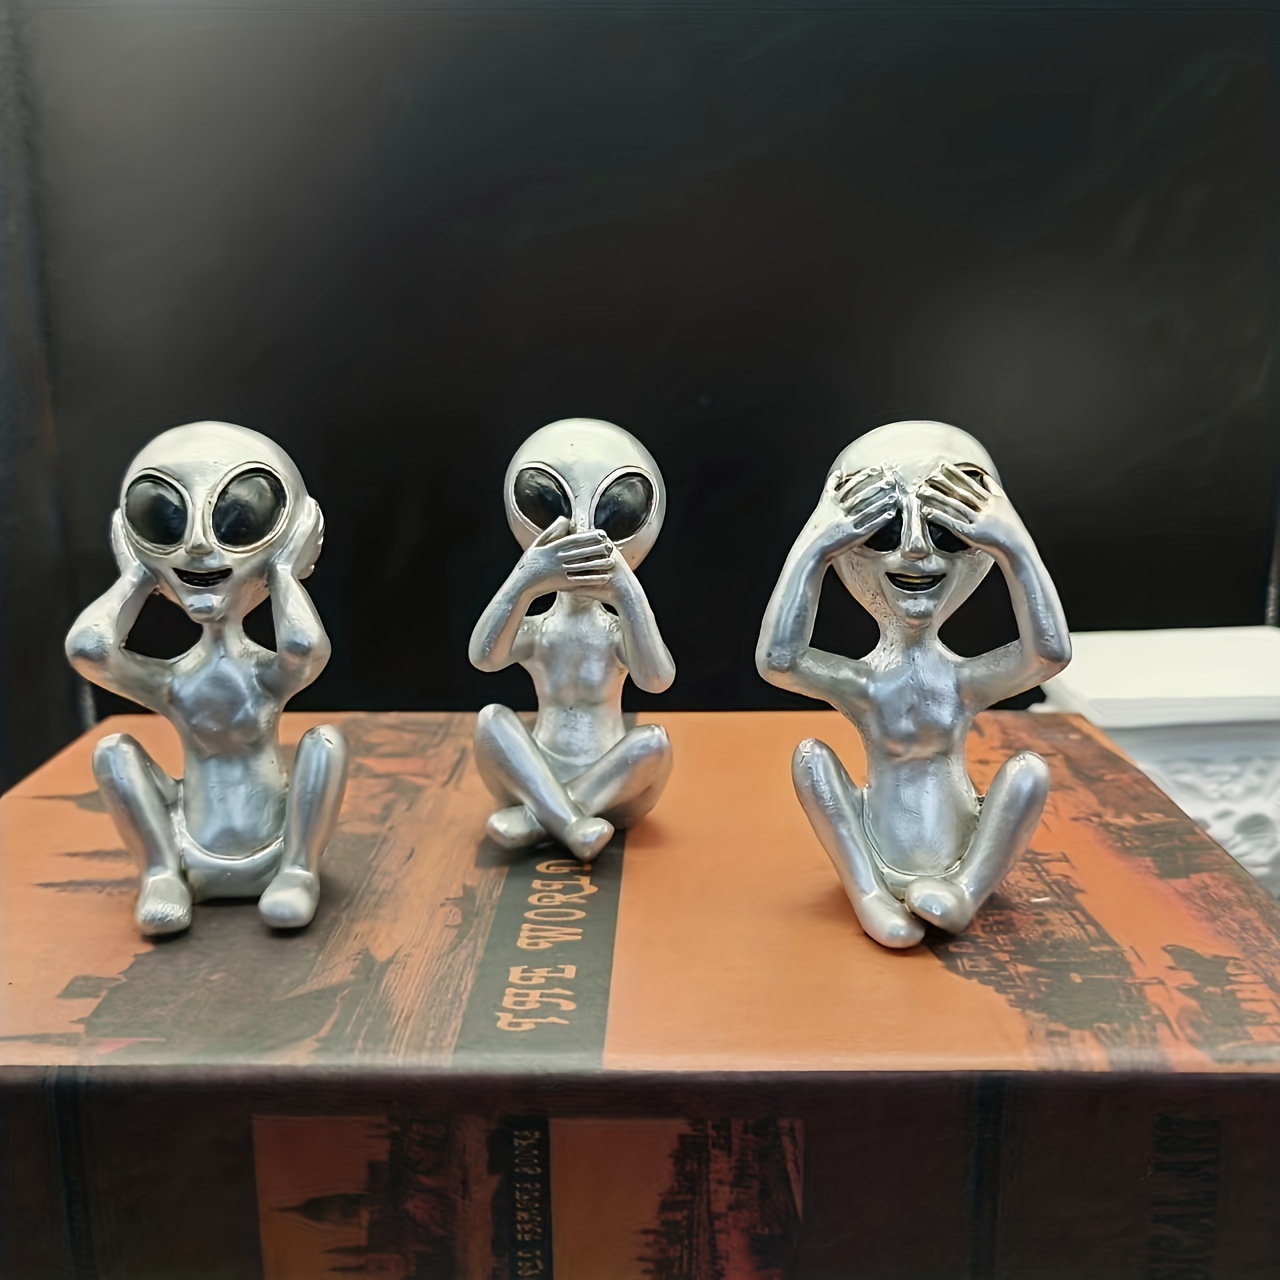 

3 Pieces Resin Alien Figurines: Perfect For Indoor And Outdoor Decor - No Power Required